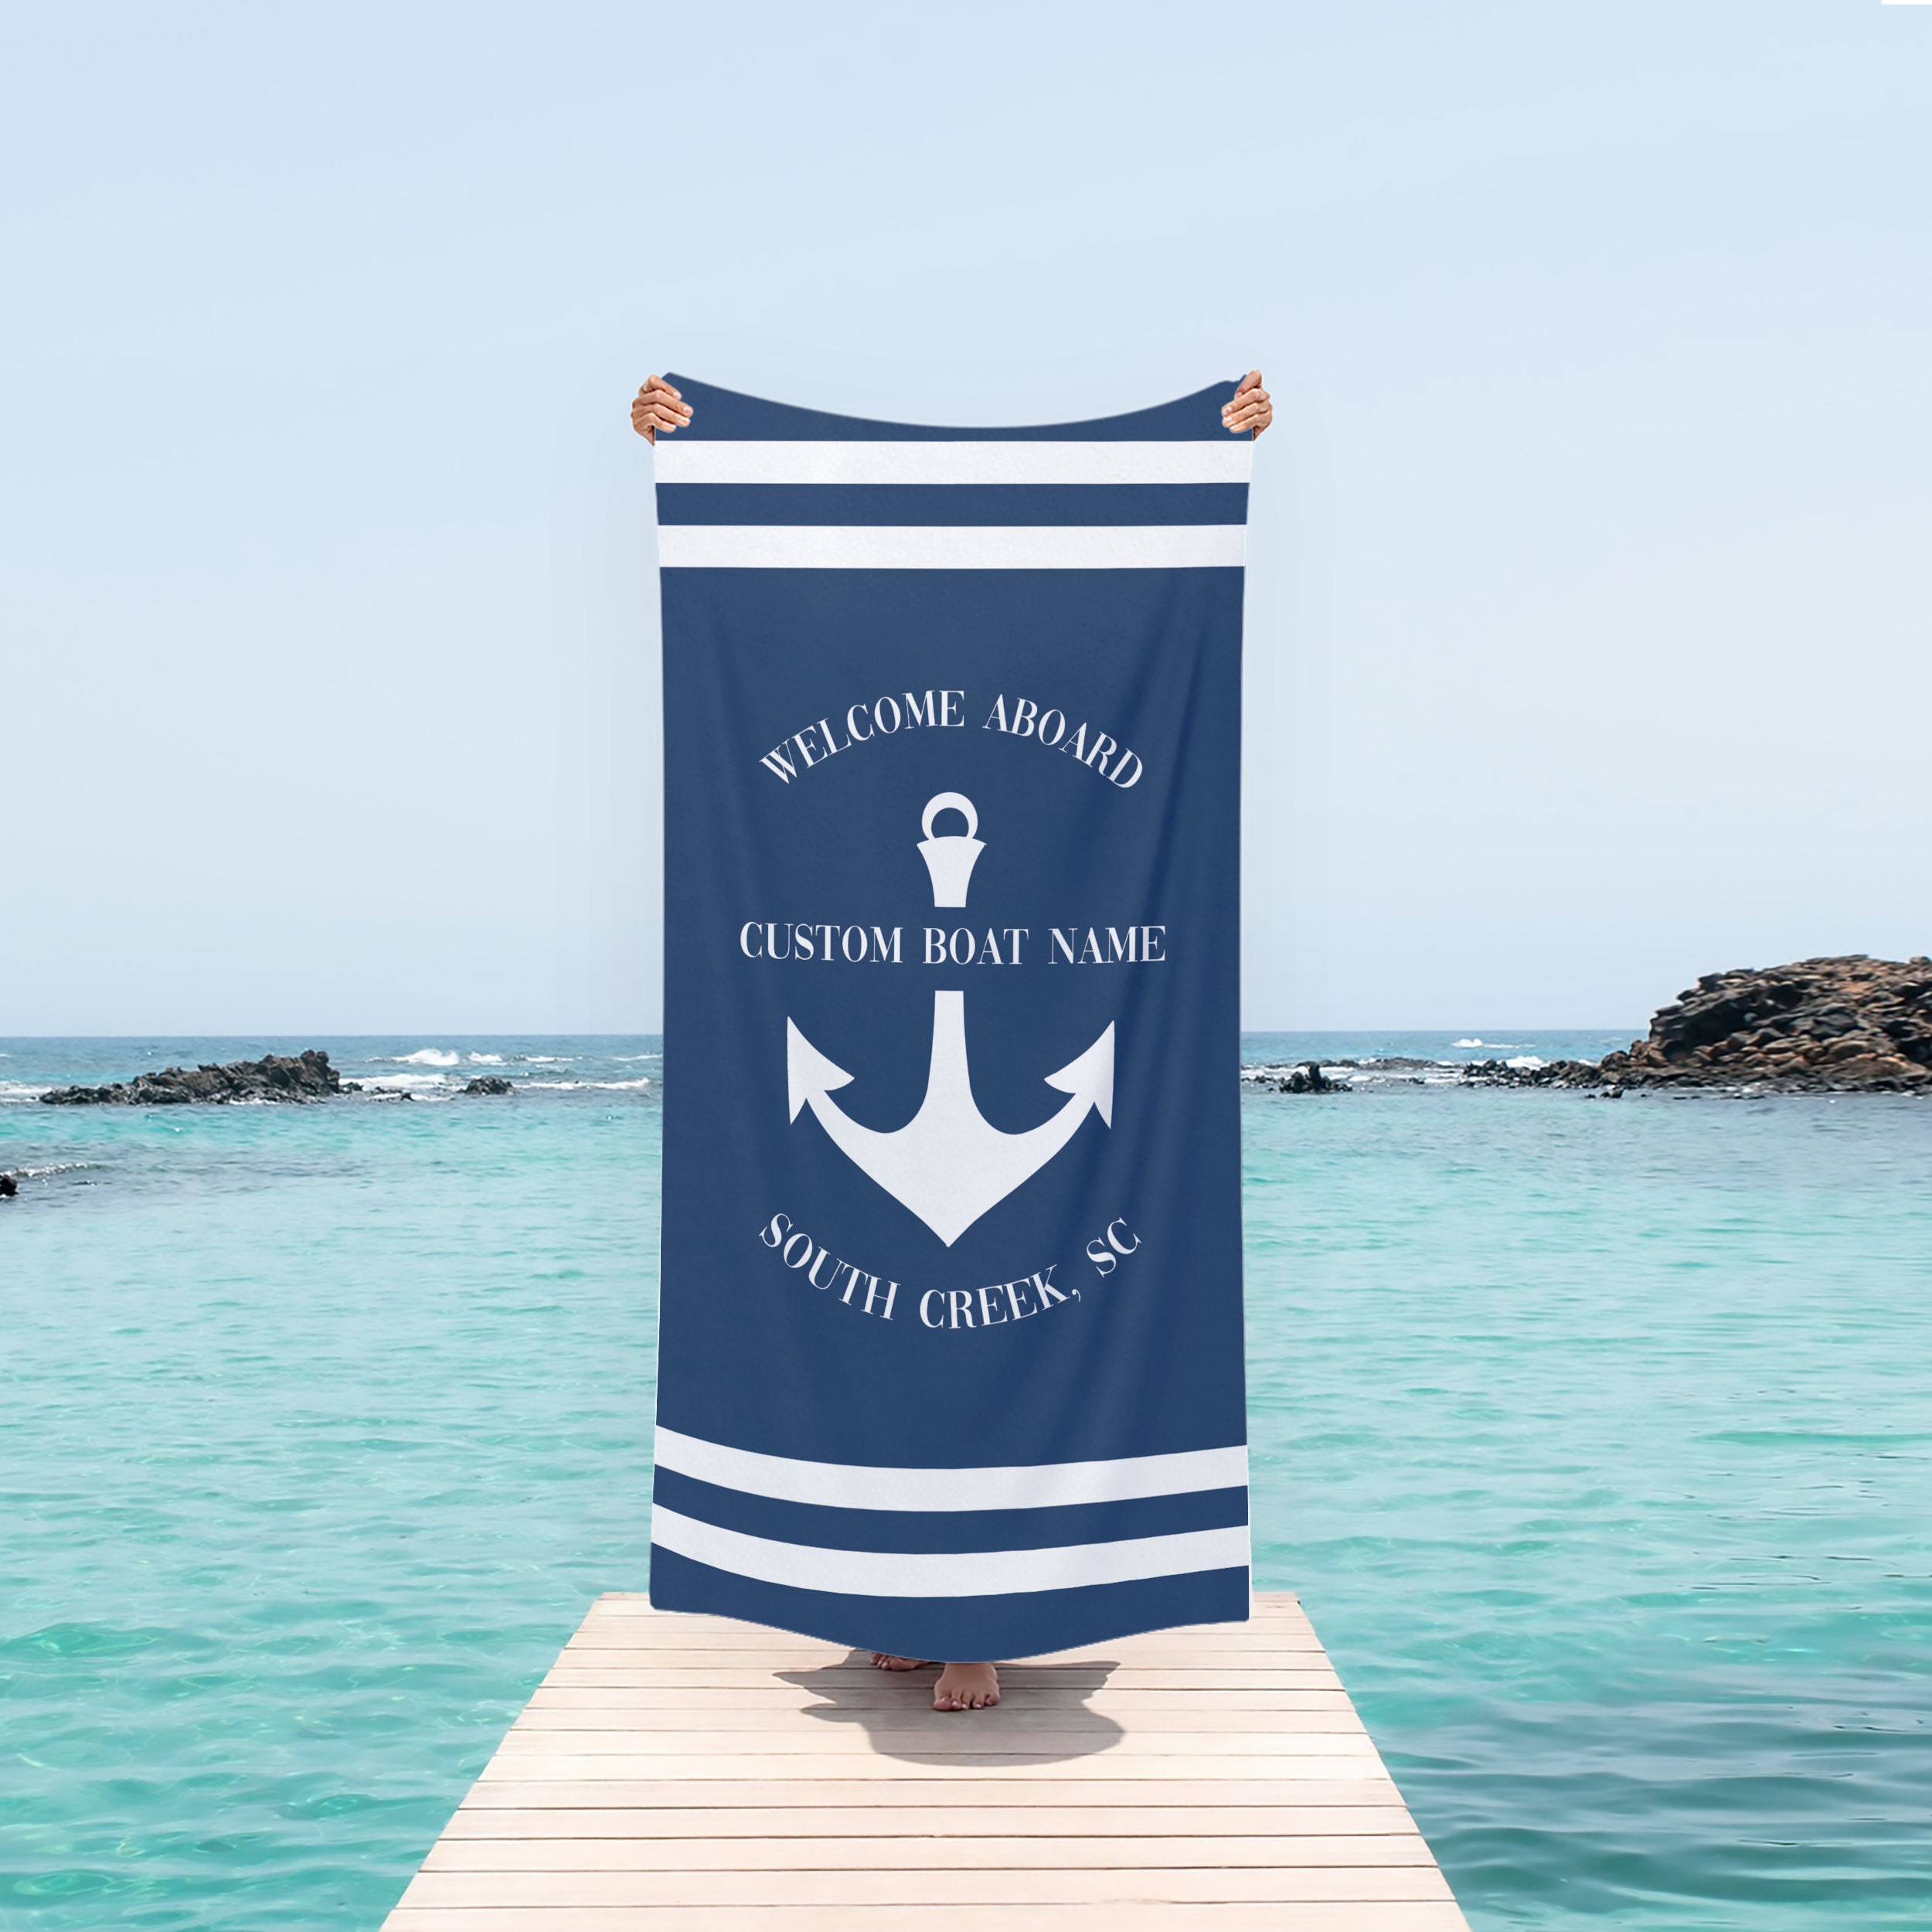 Boat Name on Towel 